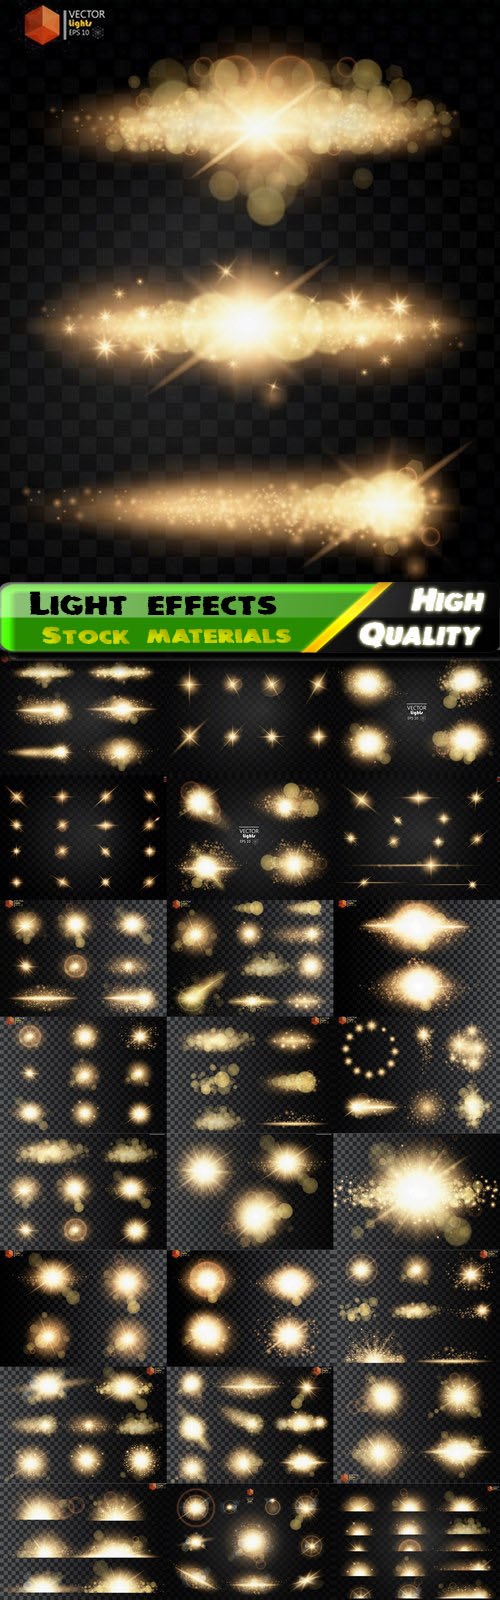 Gloving light effects ray shining star sun particles and sparks 25 Eps